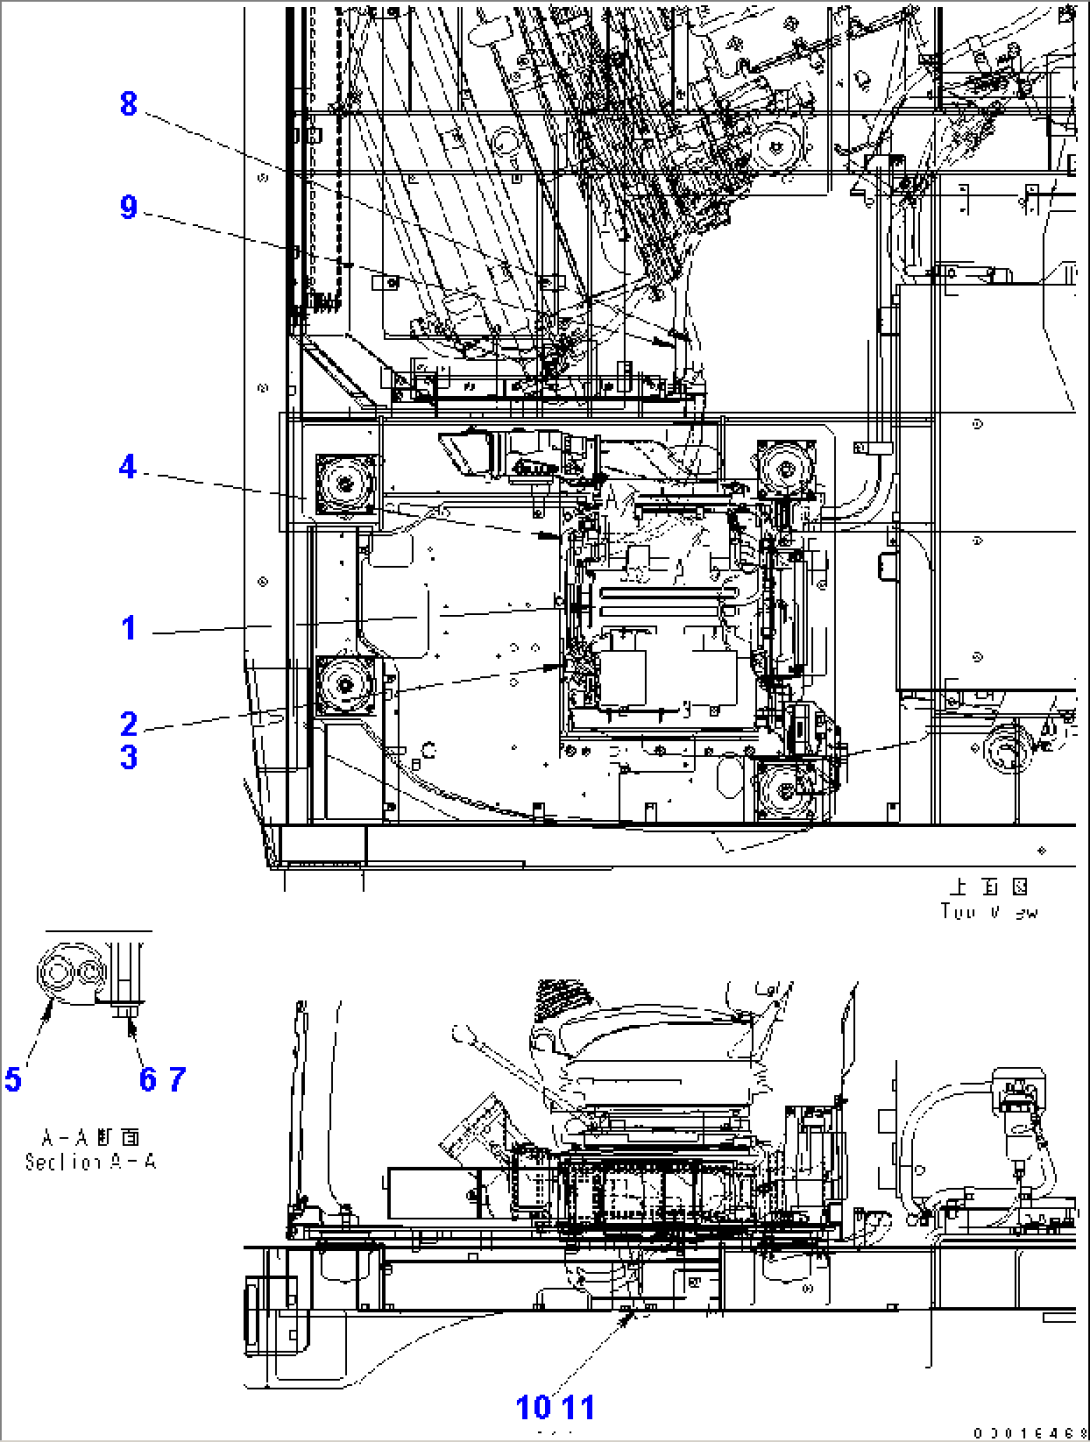 FLOOR FRAME (AIR CONDITIONER UNIT AND HOSE)